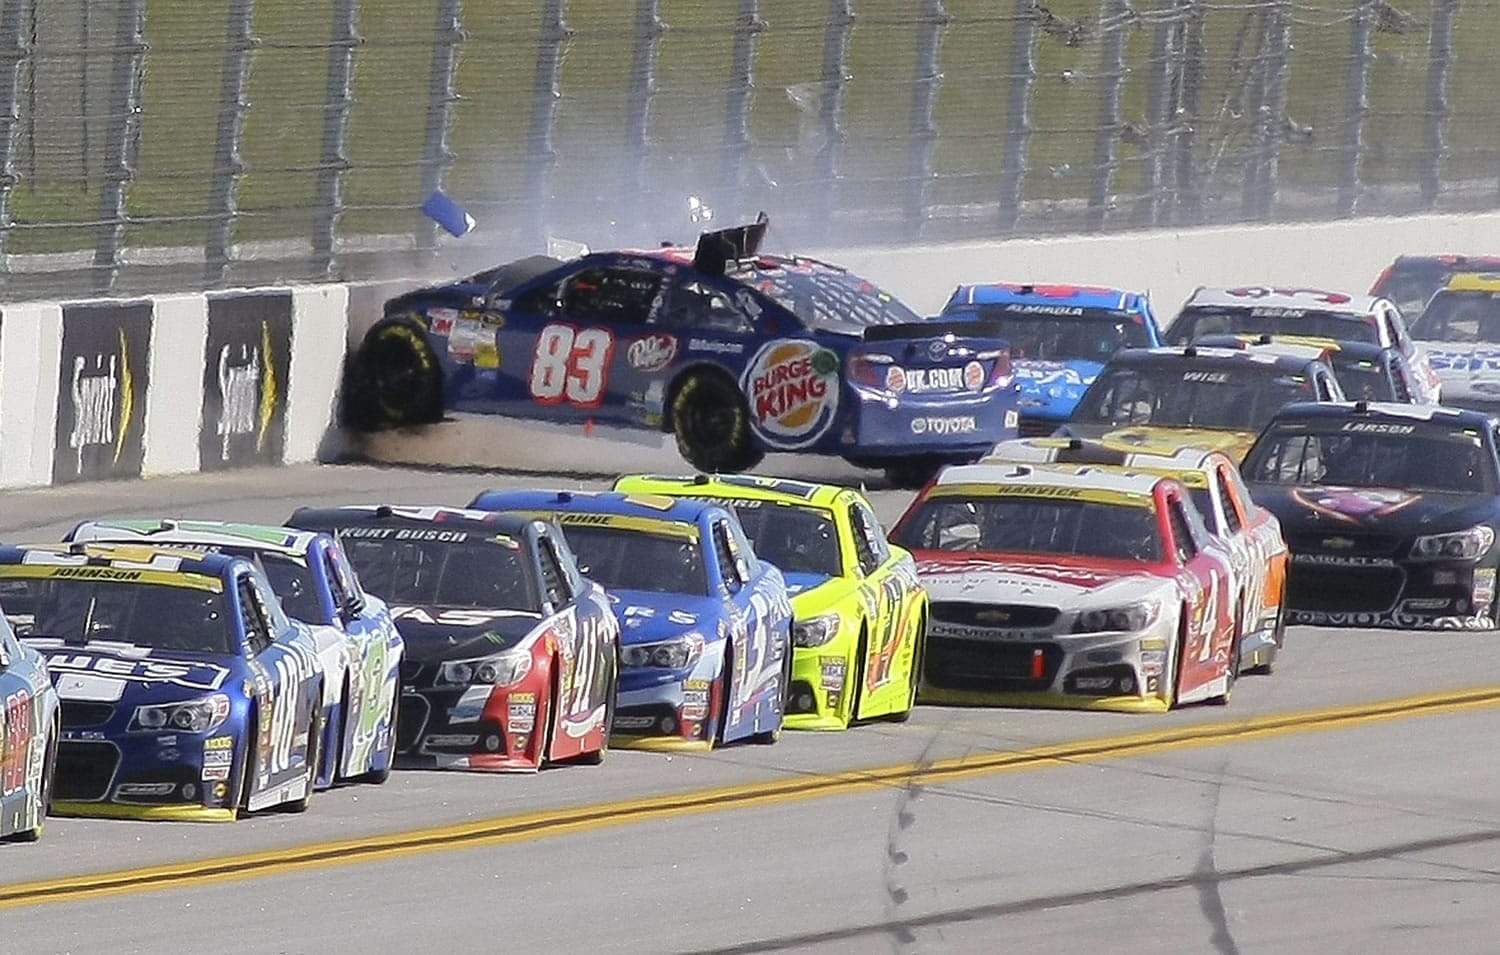 J.J. Yeley (83) wrecks on the backstretch during the NASCAR Sprint Cup Series auto race at Talladega Superspeedway, Sunday, Oct. 19, 2014, in Talladega, Ala.